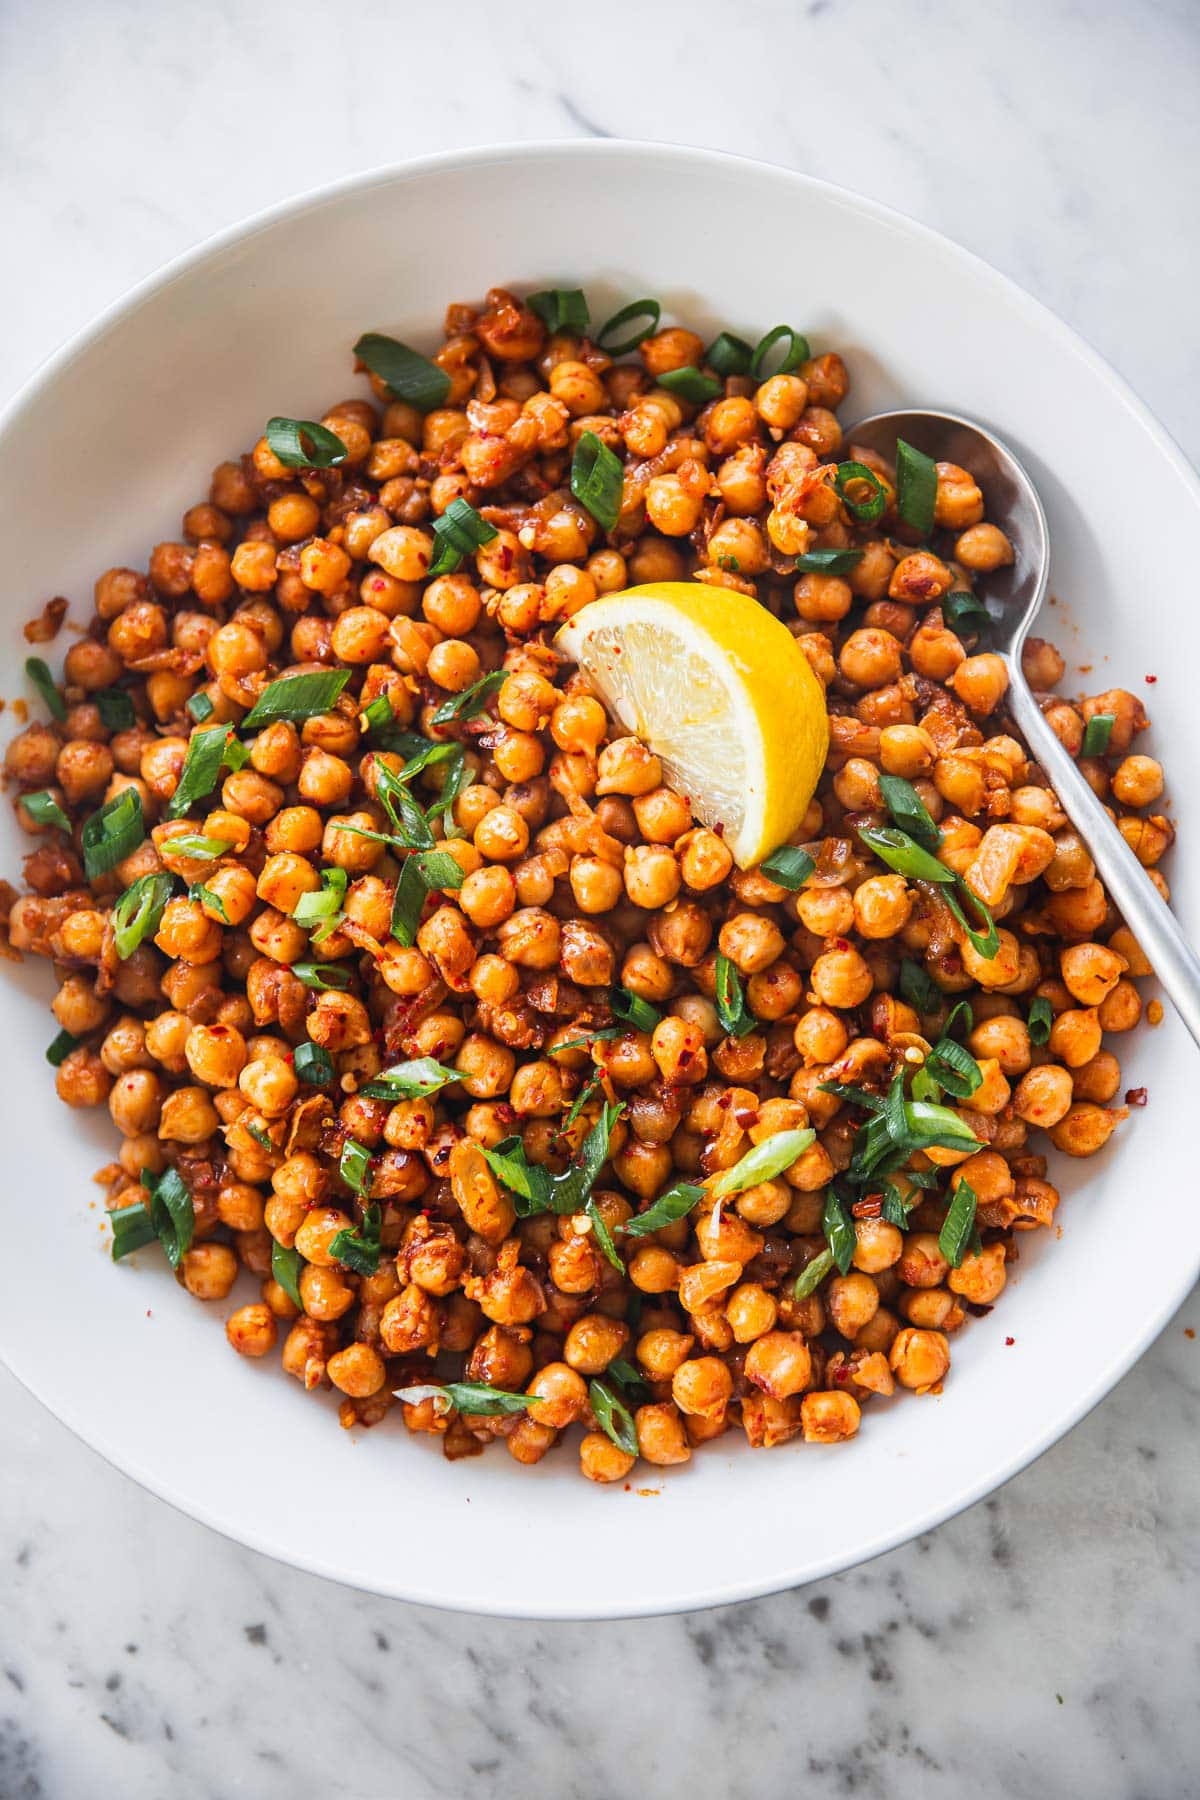 Sauteed Spicy Chickpeas in a white bowl with a lemon wedge and spoon.